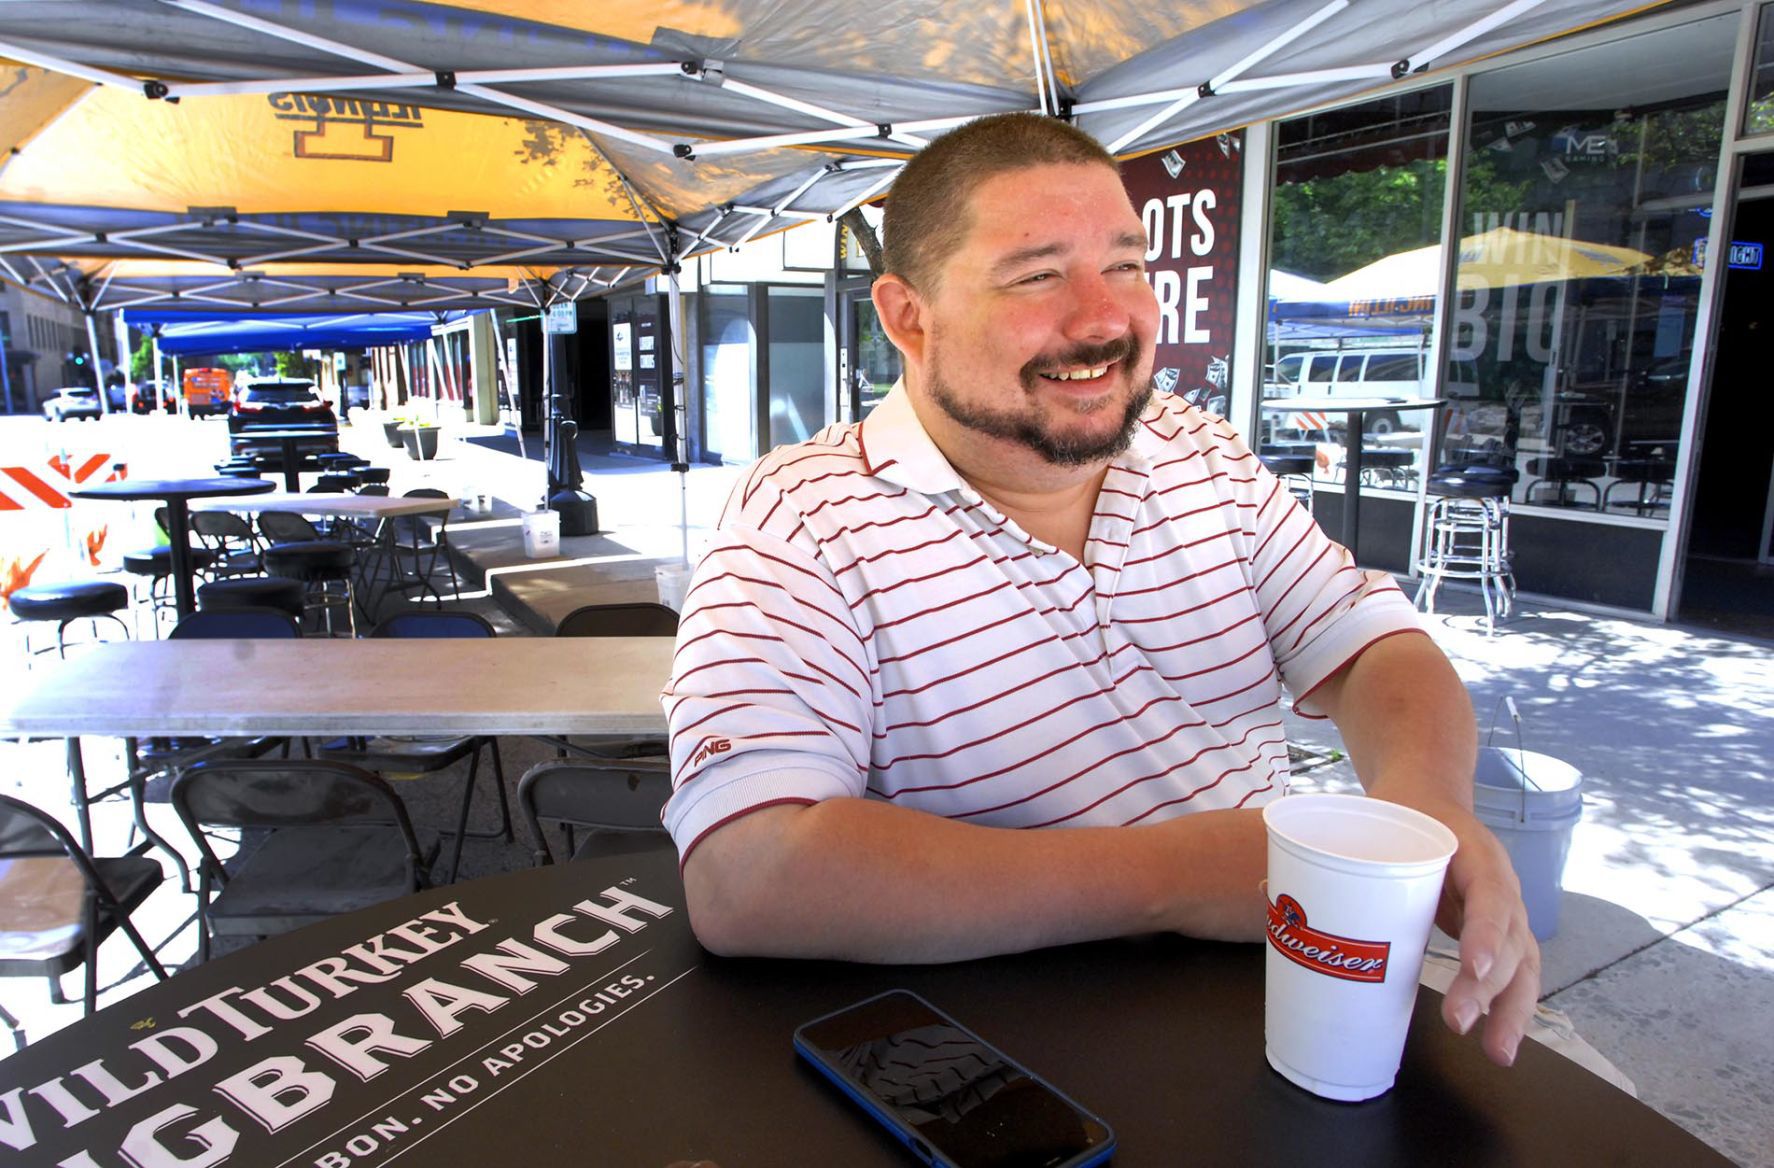 Outdoor dining brings smiles to Bloomington-Normal patrons hungry for restaurant experience pic